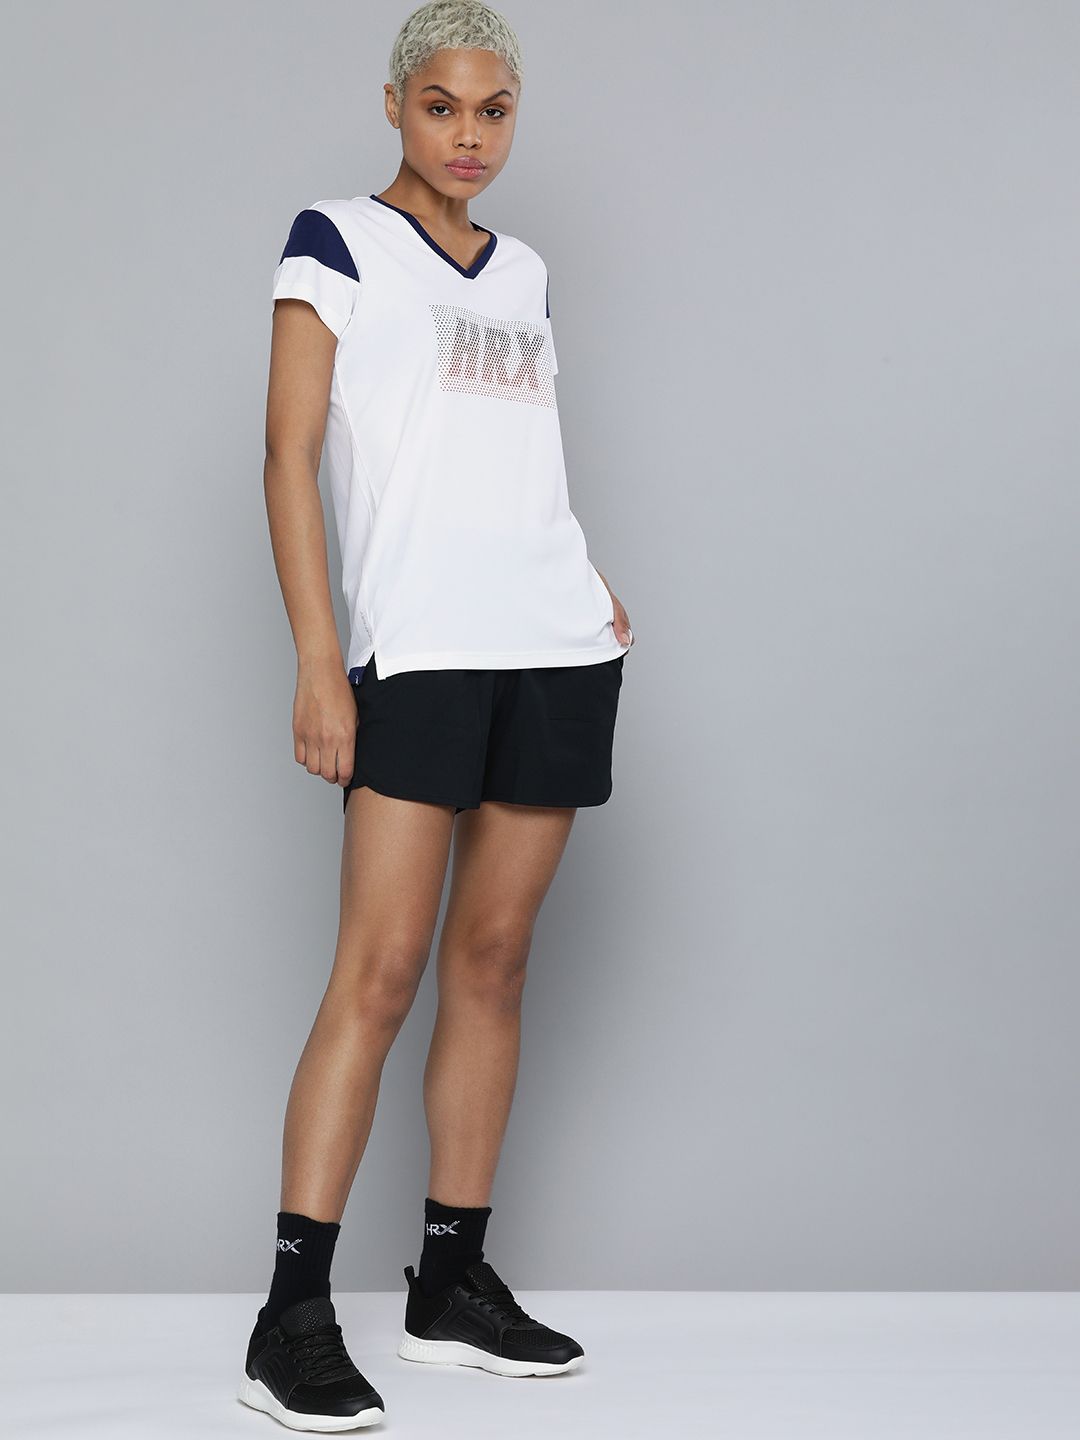 HRX By Hrithik Roshan Women White Rapid-Dry Brand Carrier Football Tshirts Price in India